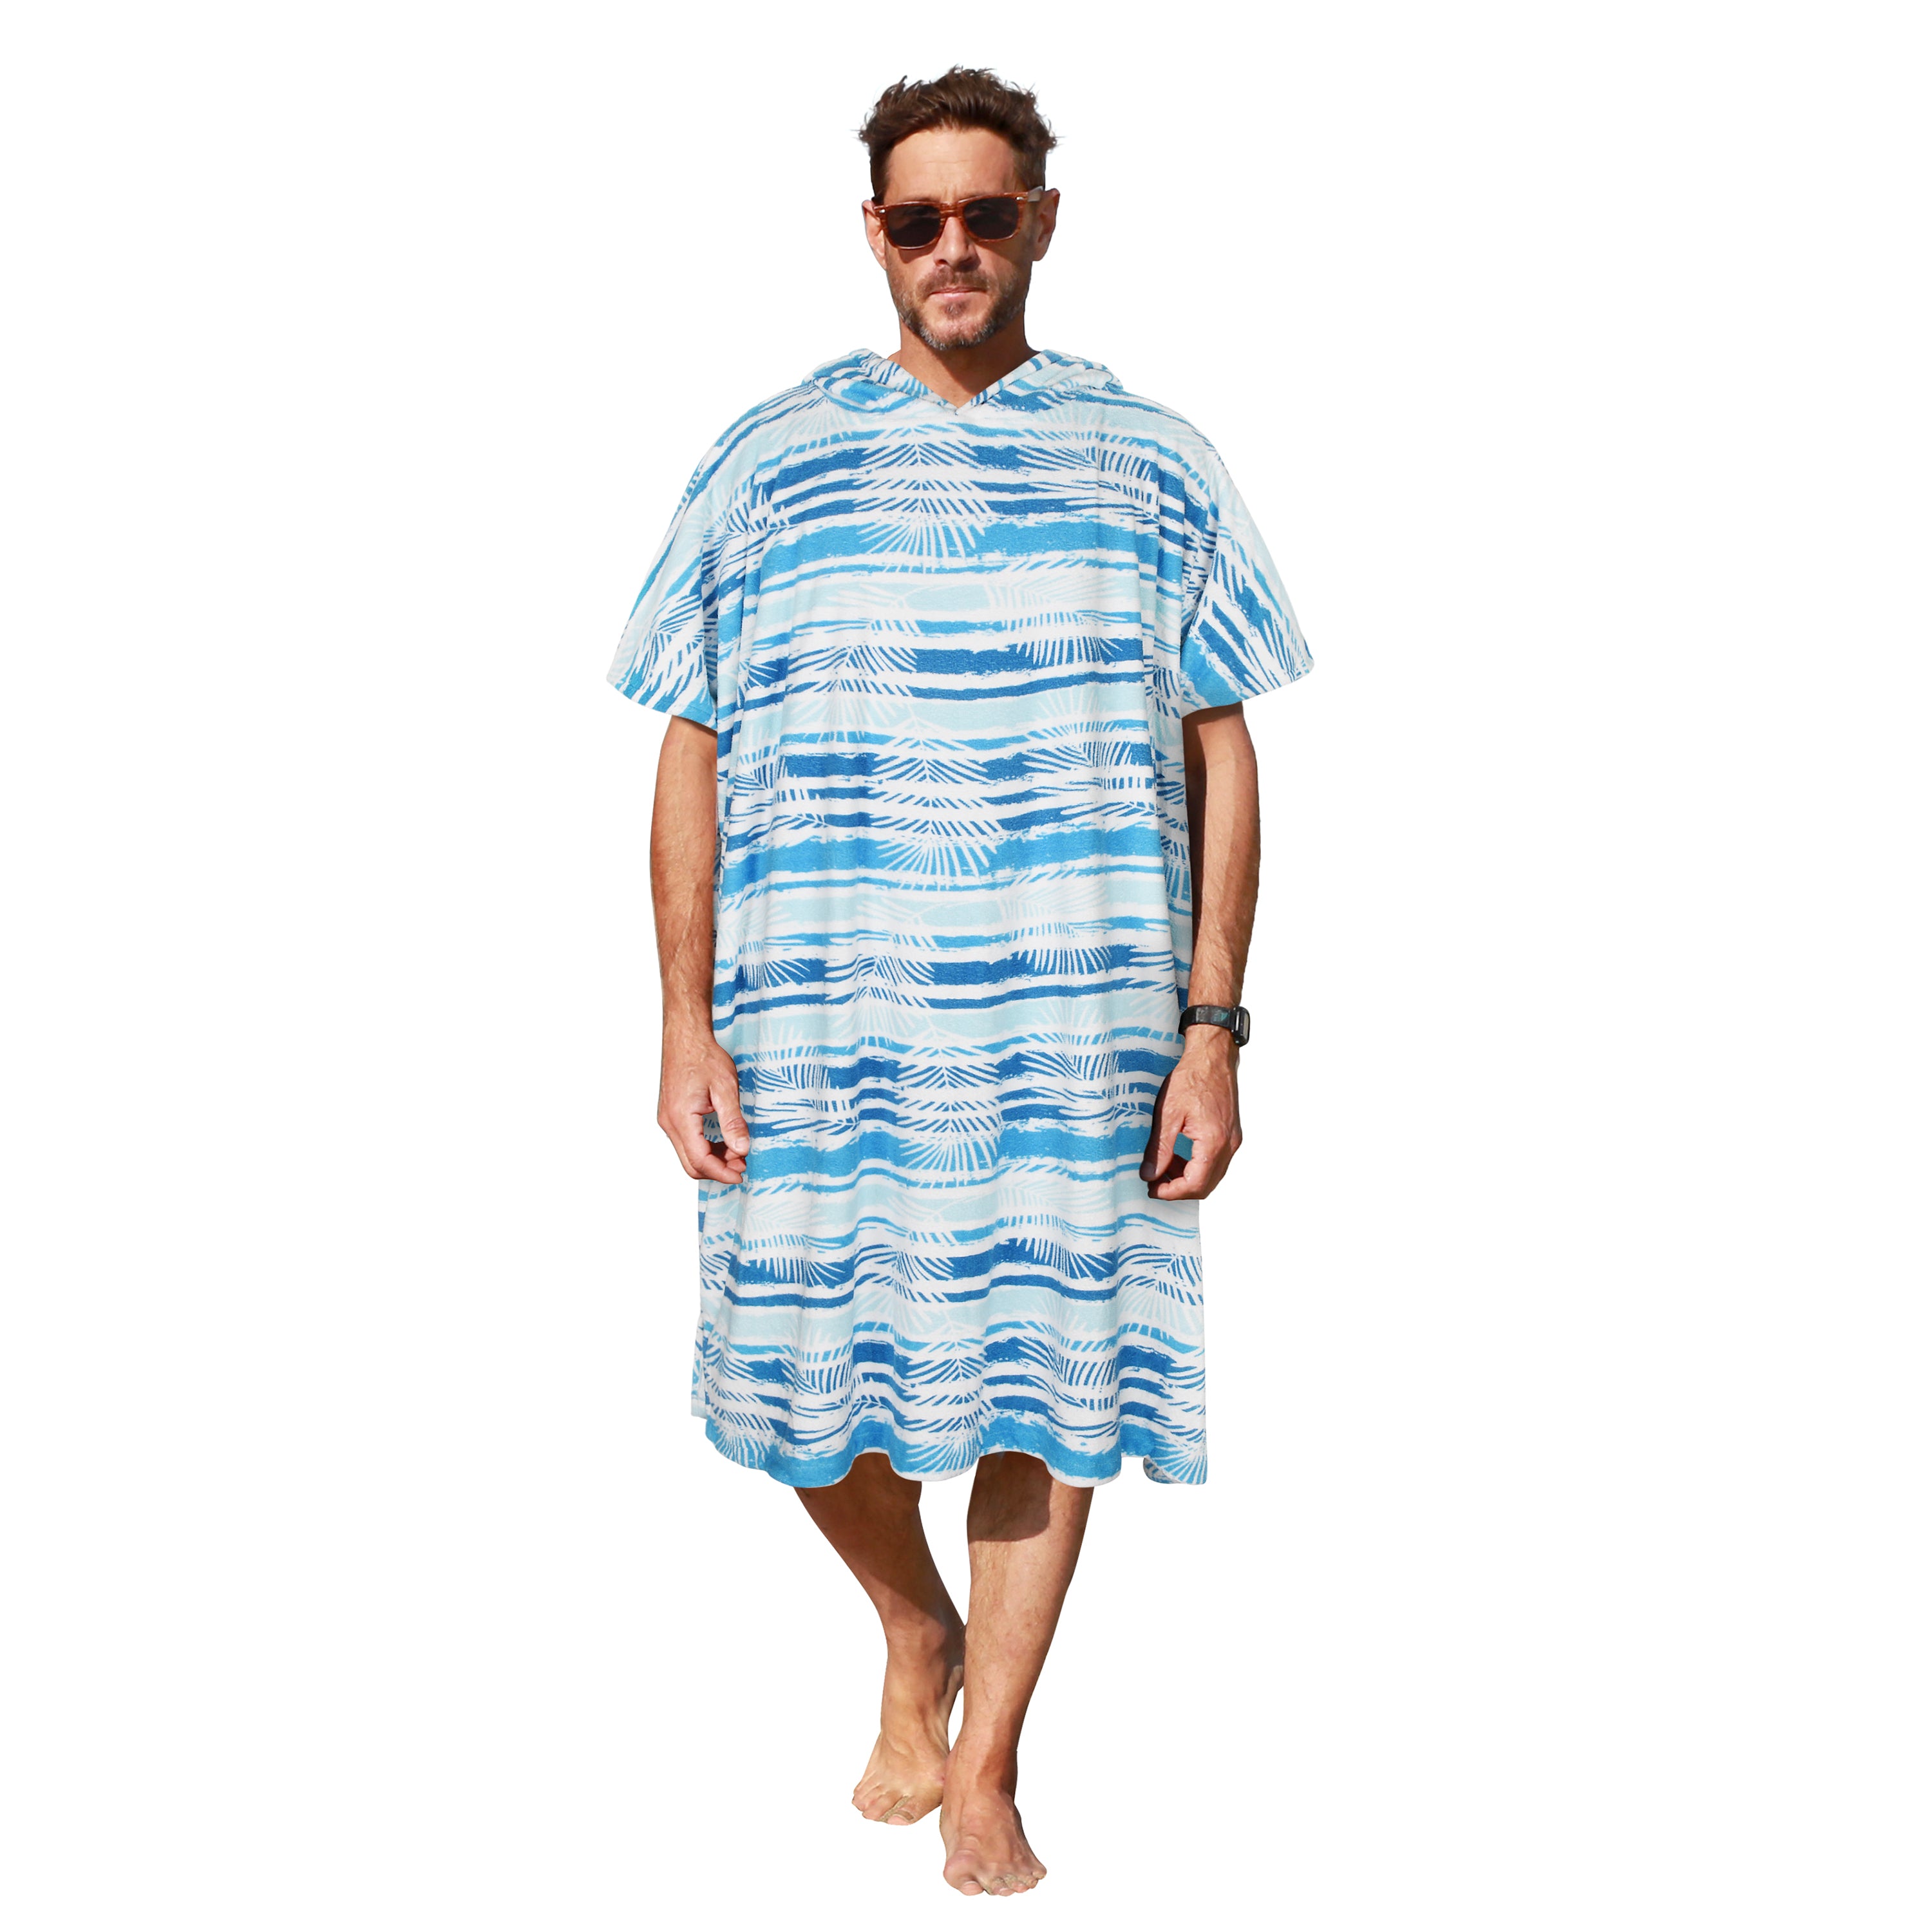 Catalonia Surf Poncho Changing Towel Robe for Adults Men Women, Hooded Wetsuit Change Poncho for Surfing Swimming Bathing, Water, Surf